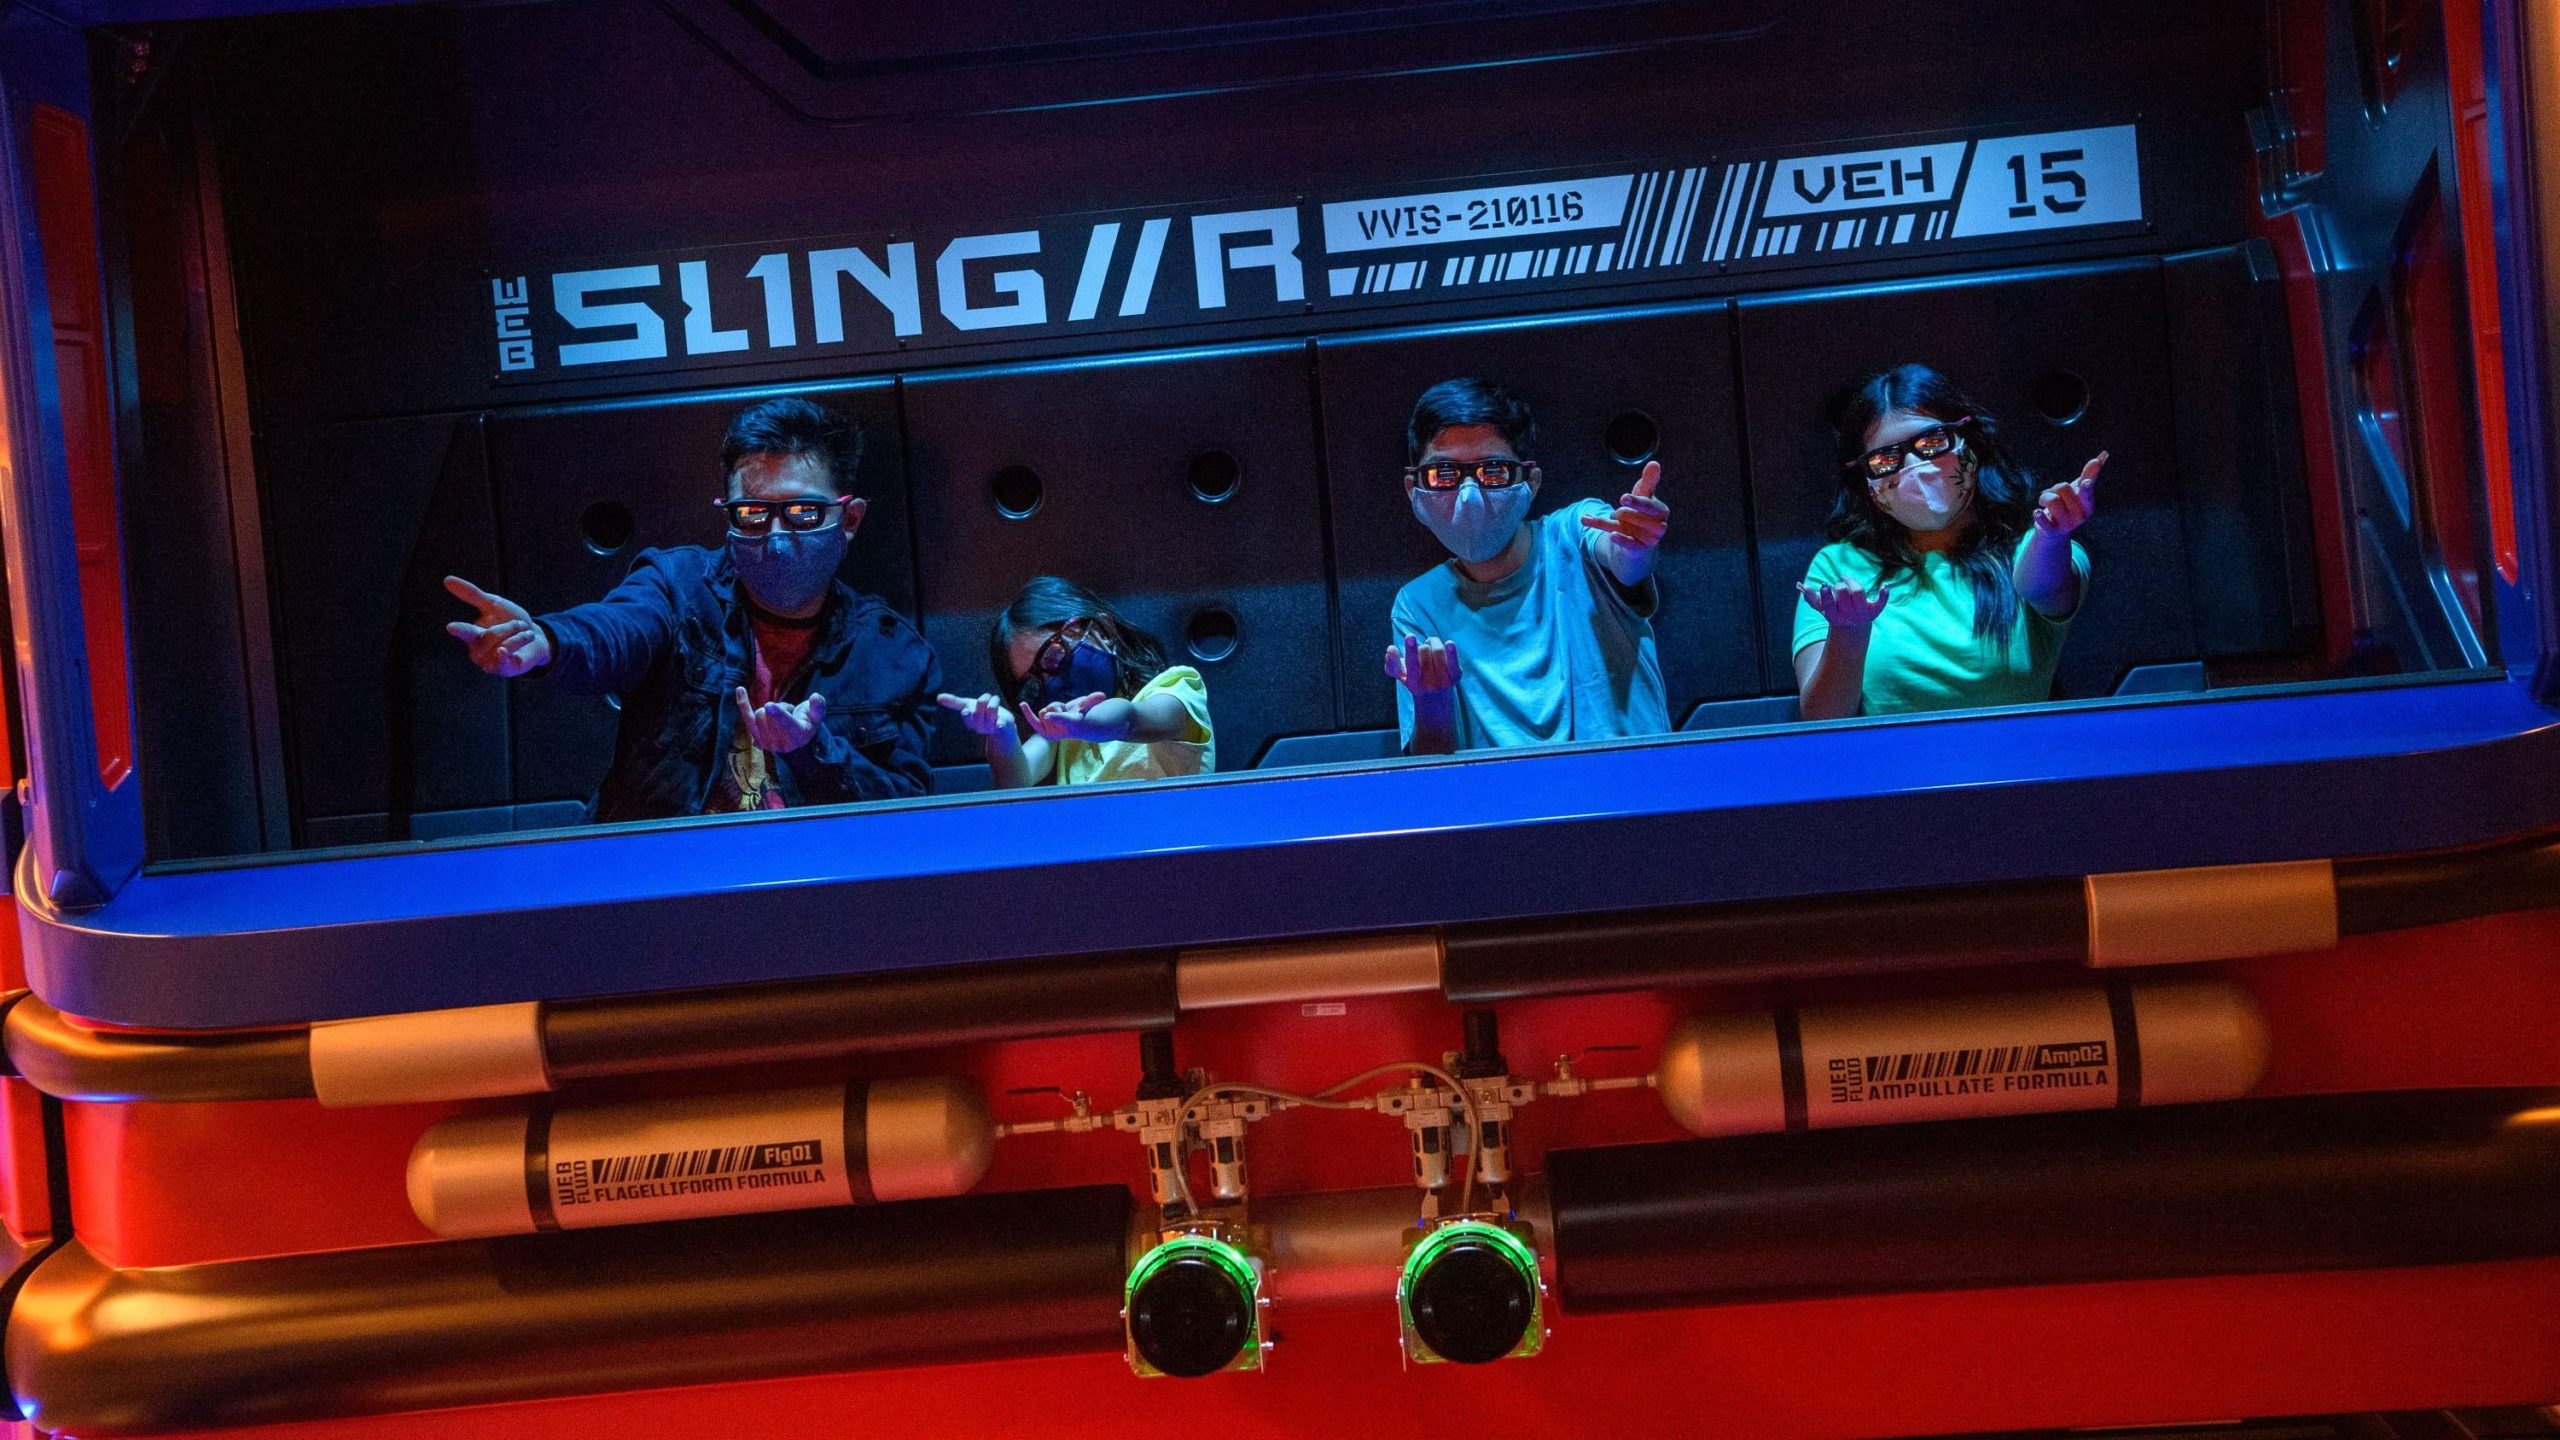 You shoot webs with your real arms using motion capture technology. (Photo: Disney Parks)